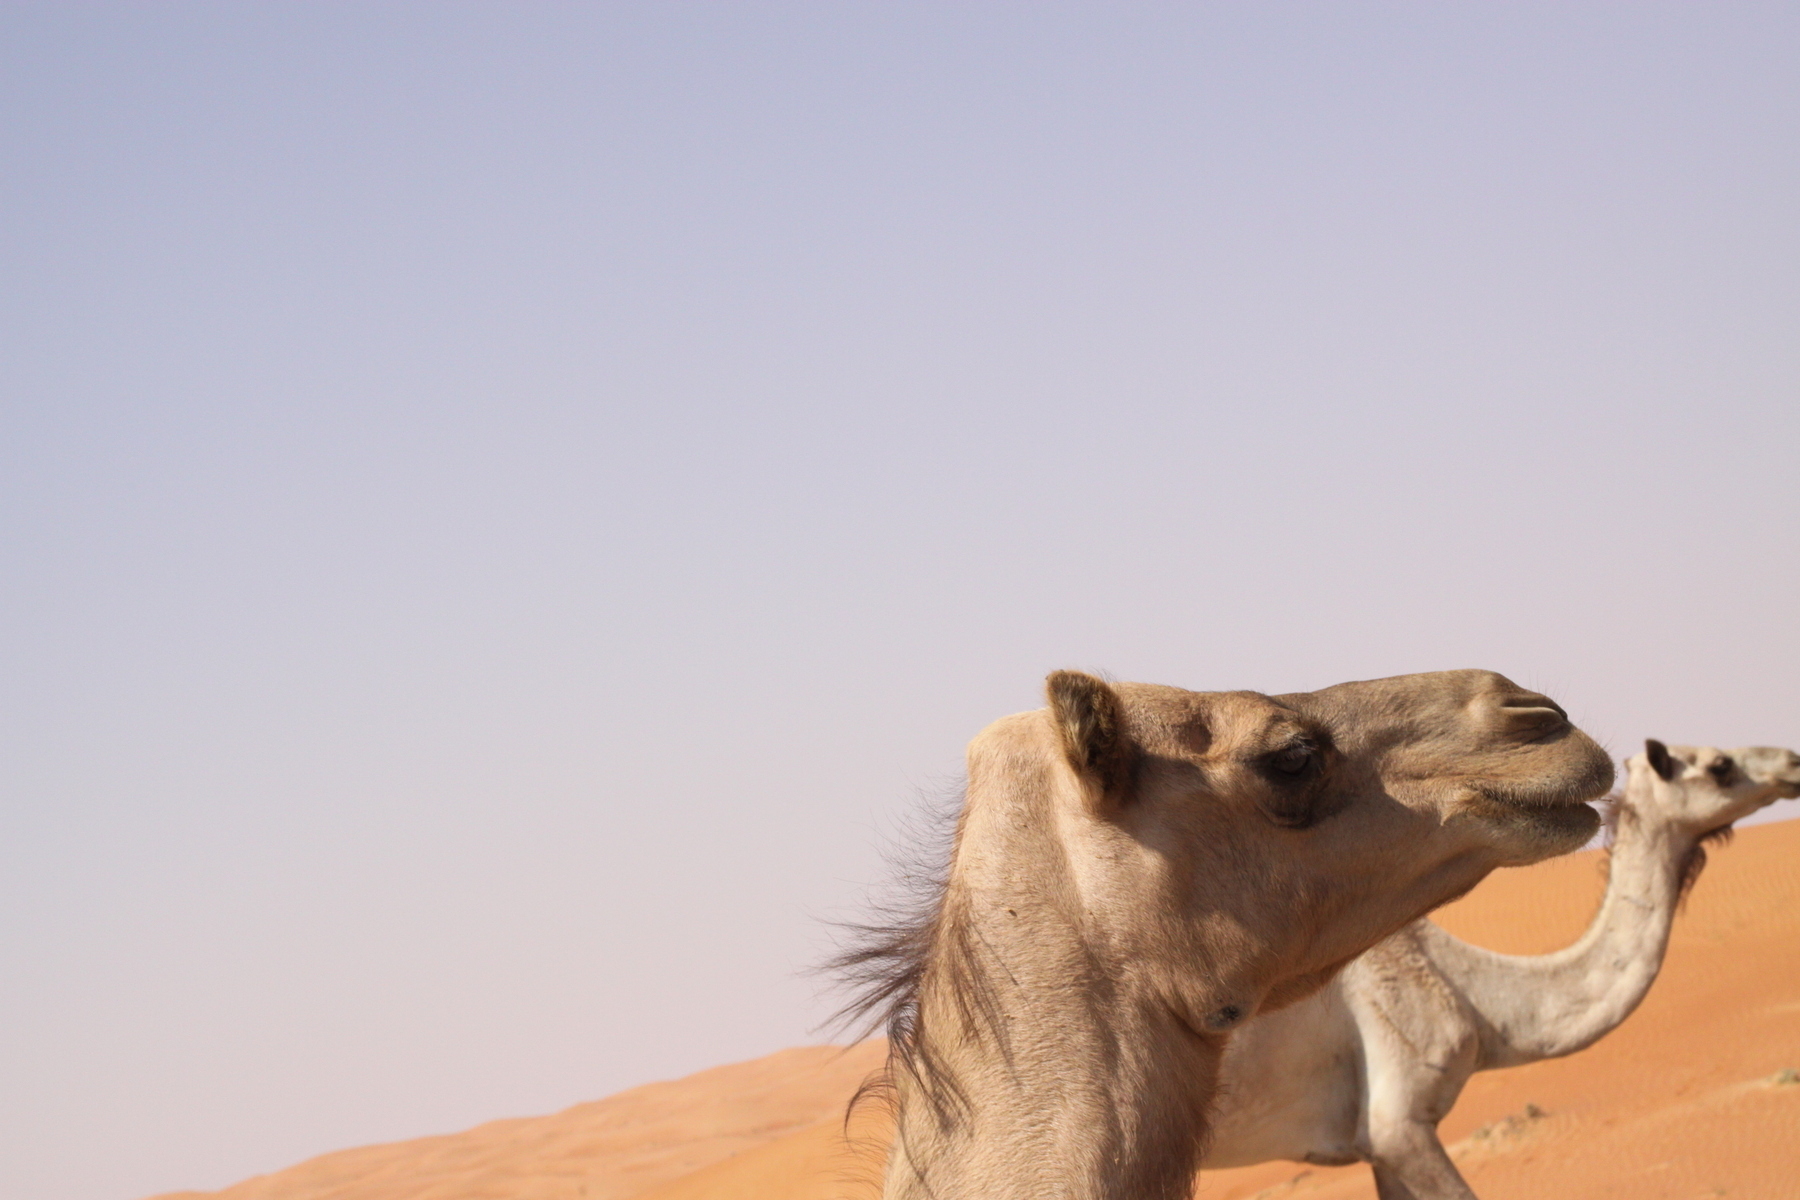 a digital photograph of a few camels in the desert